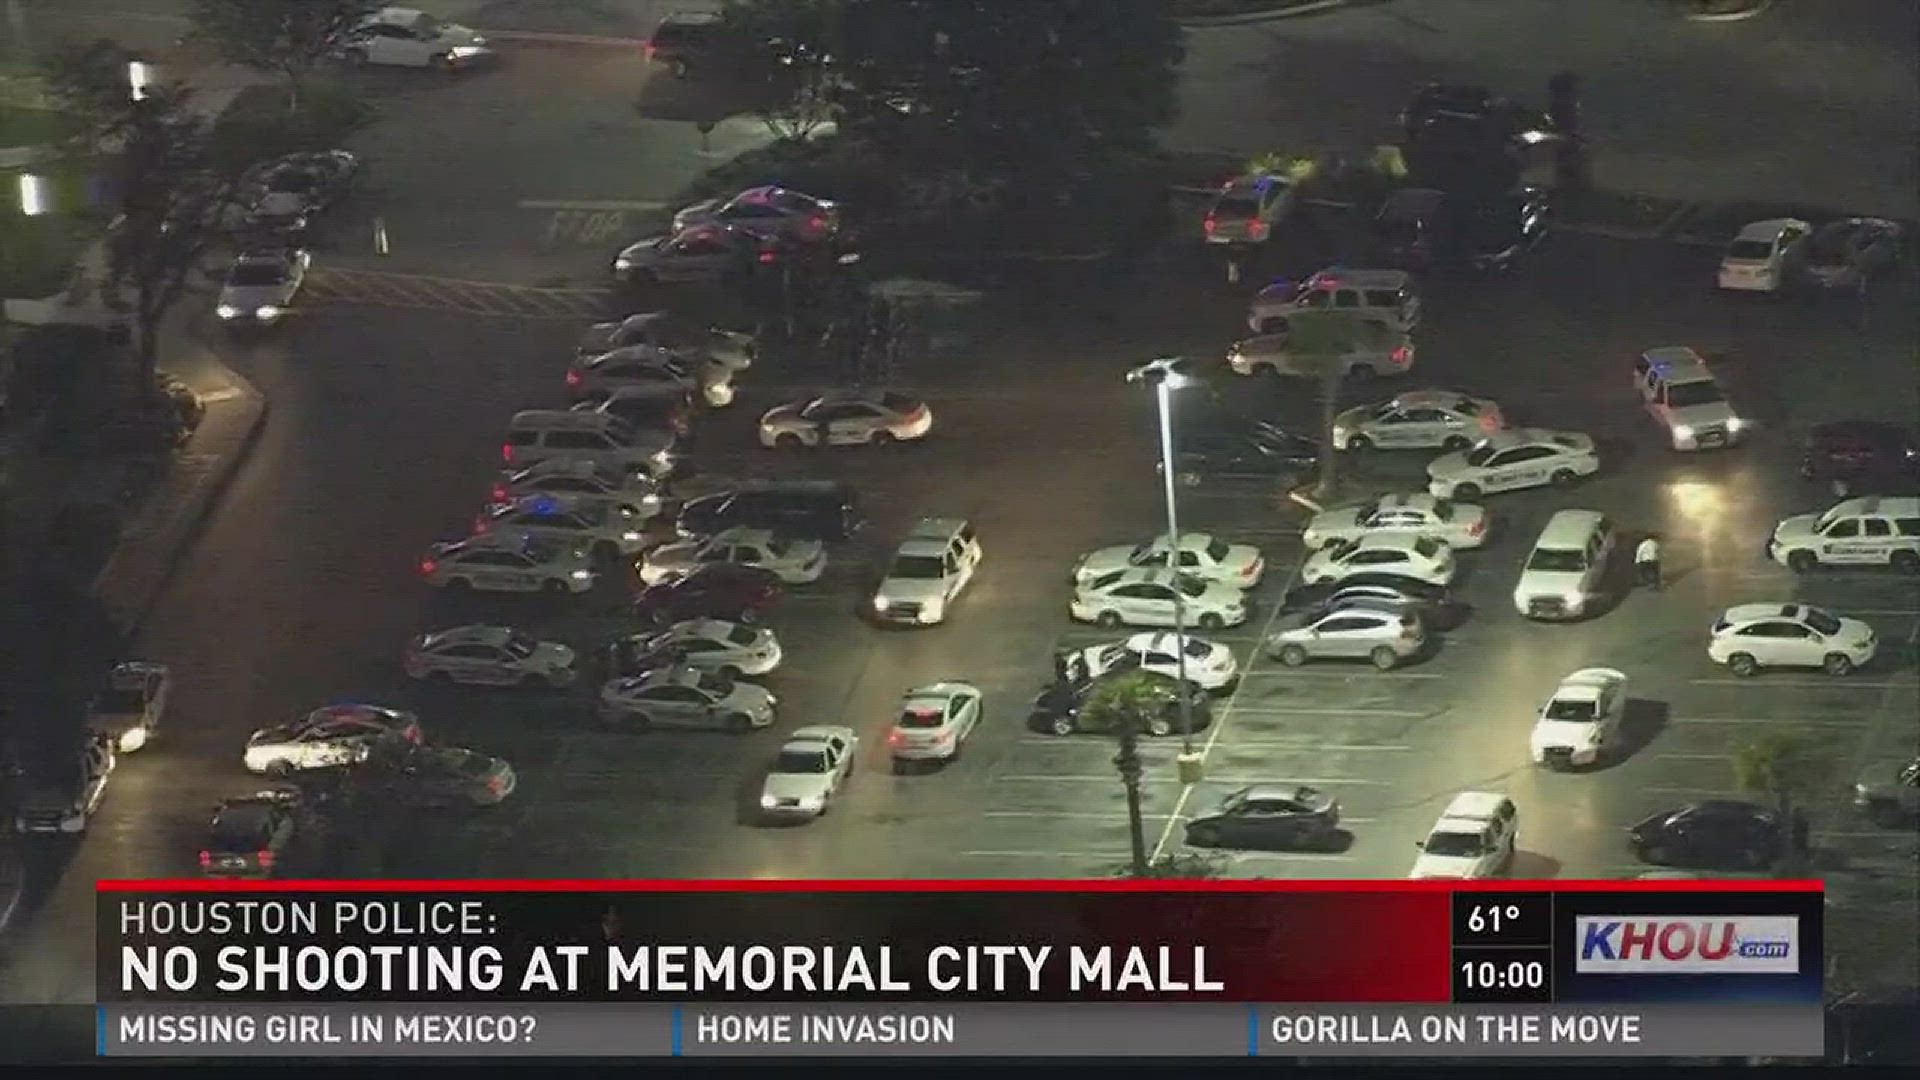 Houston Police say reports of a shooting at Memorial City Mall Saturday evening are false and the incident was a smash and grab theft at a jewelry store.